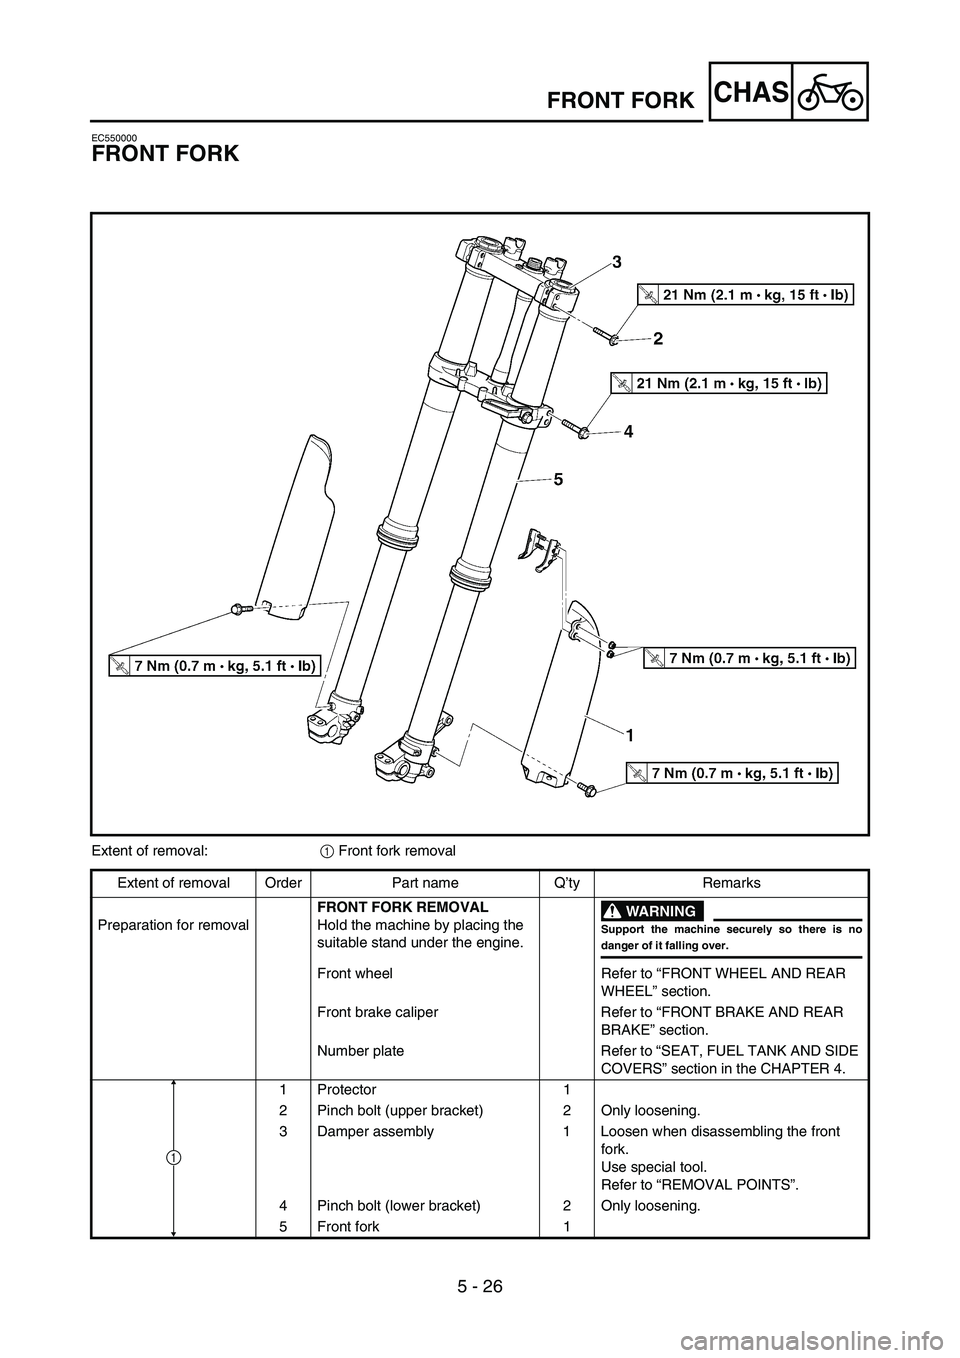 YAMAHA YZ250F 2007 User Guide 5 - 26
CHASFRONT FORK
EC550000
FRONT FORK
Extent of removal:
1 Front fork removal
Extent of removal Order Part name Q’ty Remarks
Preparation for removalFRONT FORK REMOVAL
Hold the machine by placing